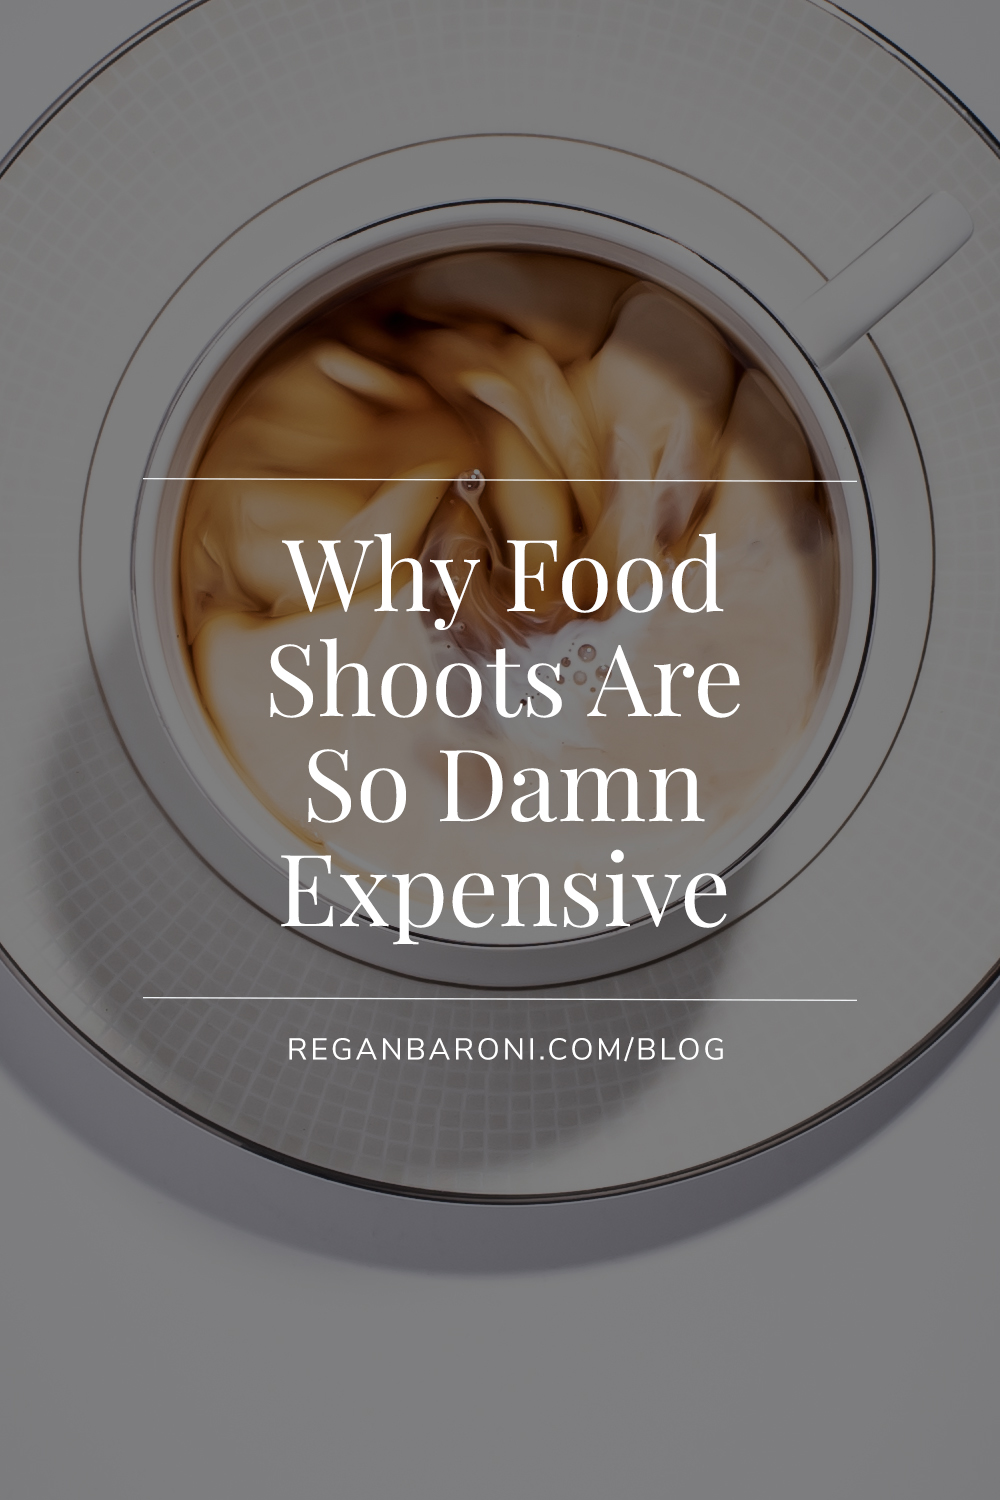 Why Food Shoots Are Expensive